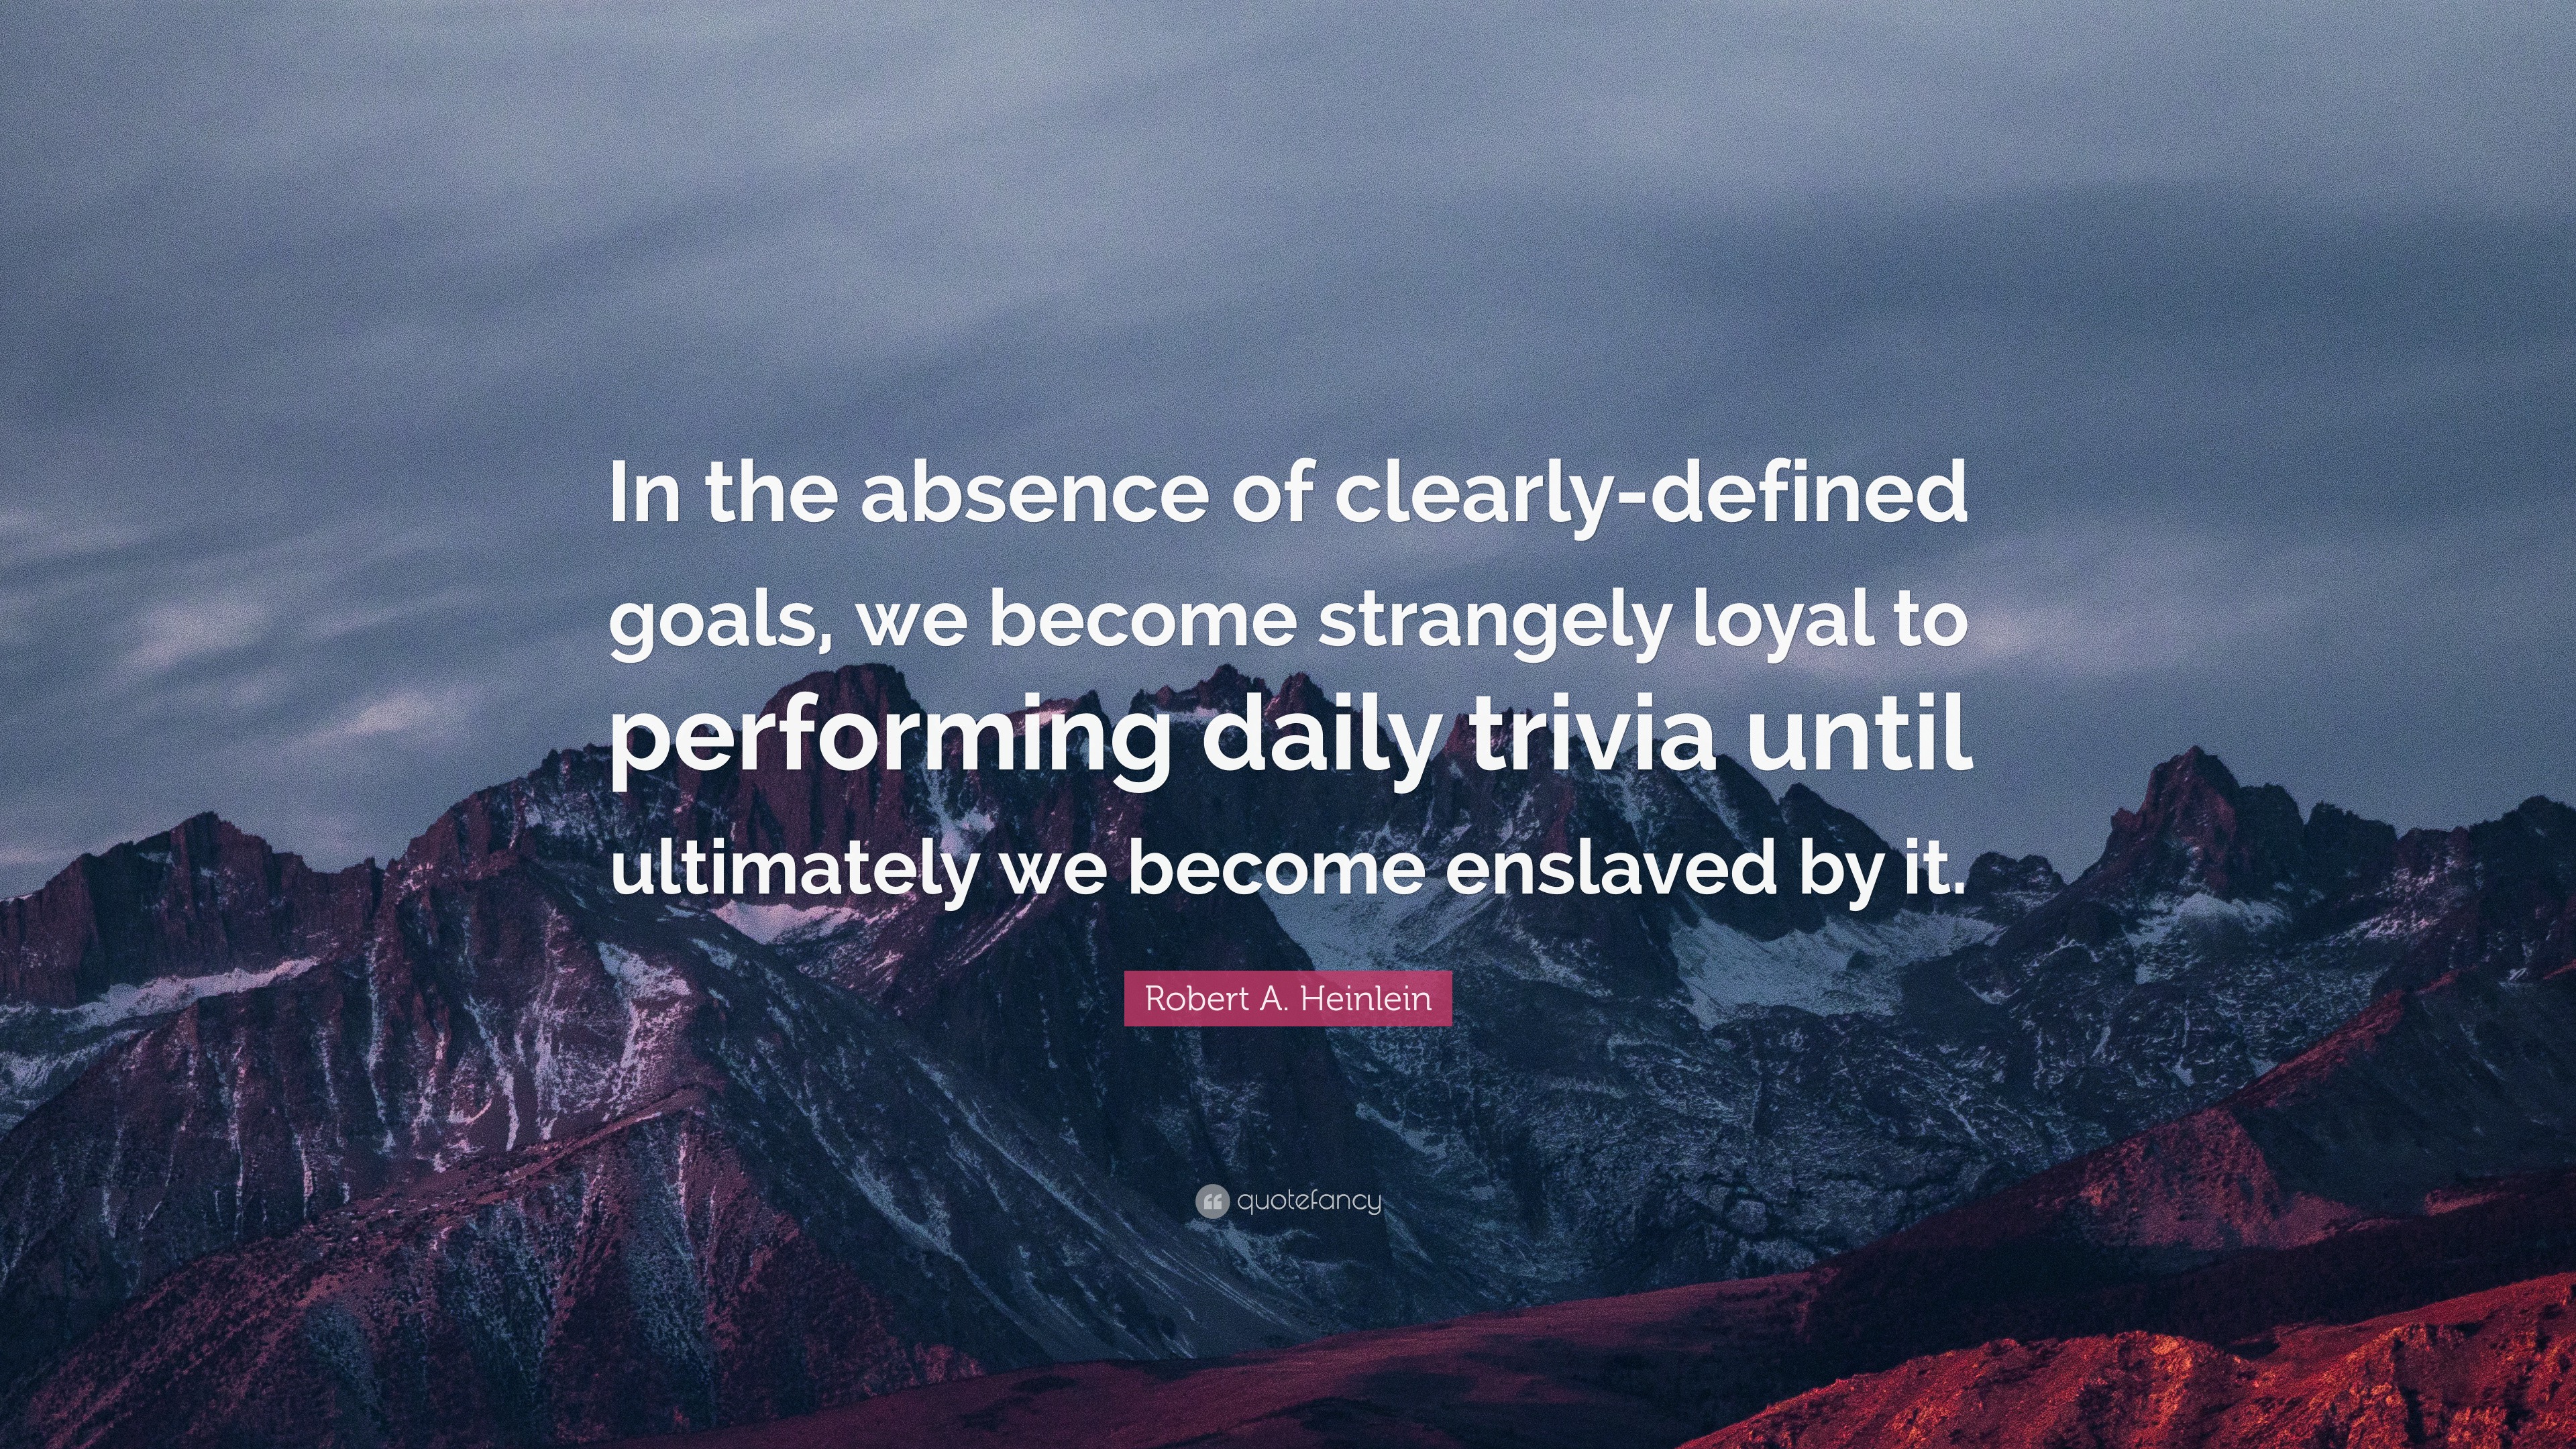 Robert A Heinlein Quote In The Absence Of Clearly Defined Goals We Become Strangely Loyal To Performing Daily Trivia Until Ultimately We Become